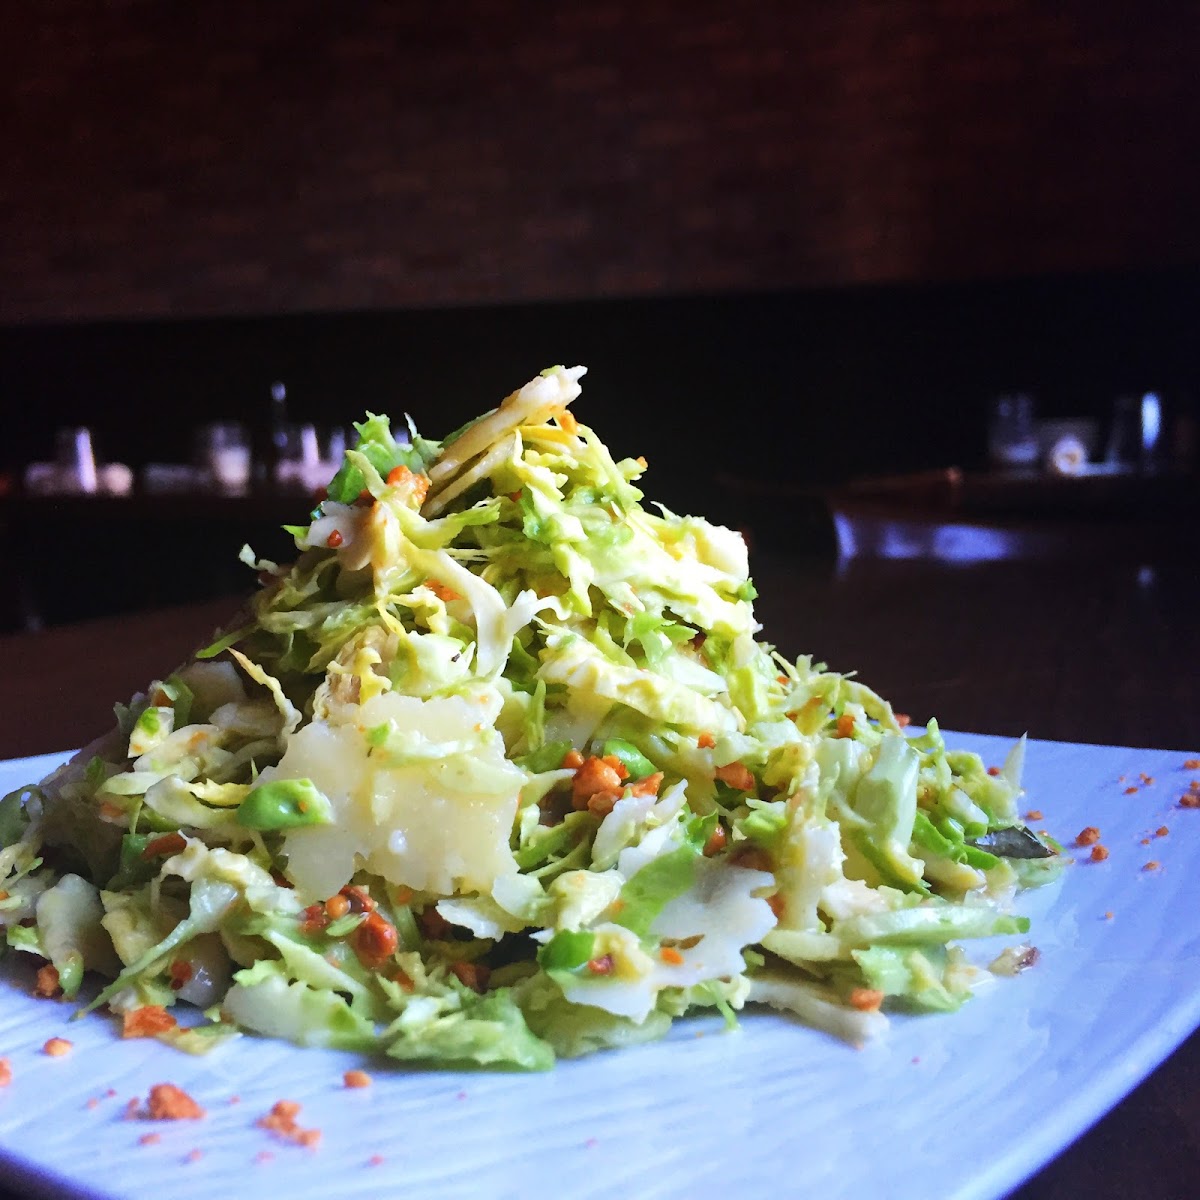 Gluten-Free Brussels Sprout Salad with Manchego Cheese and Marcona Almonds